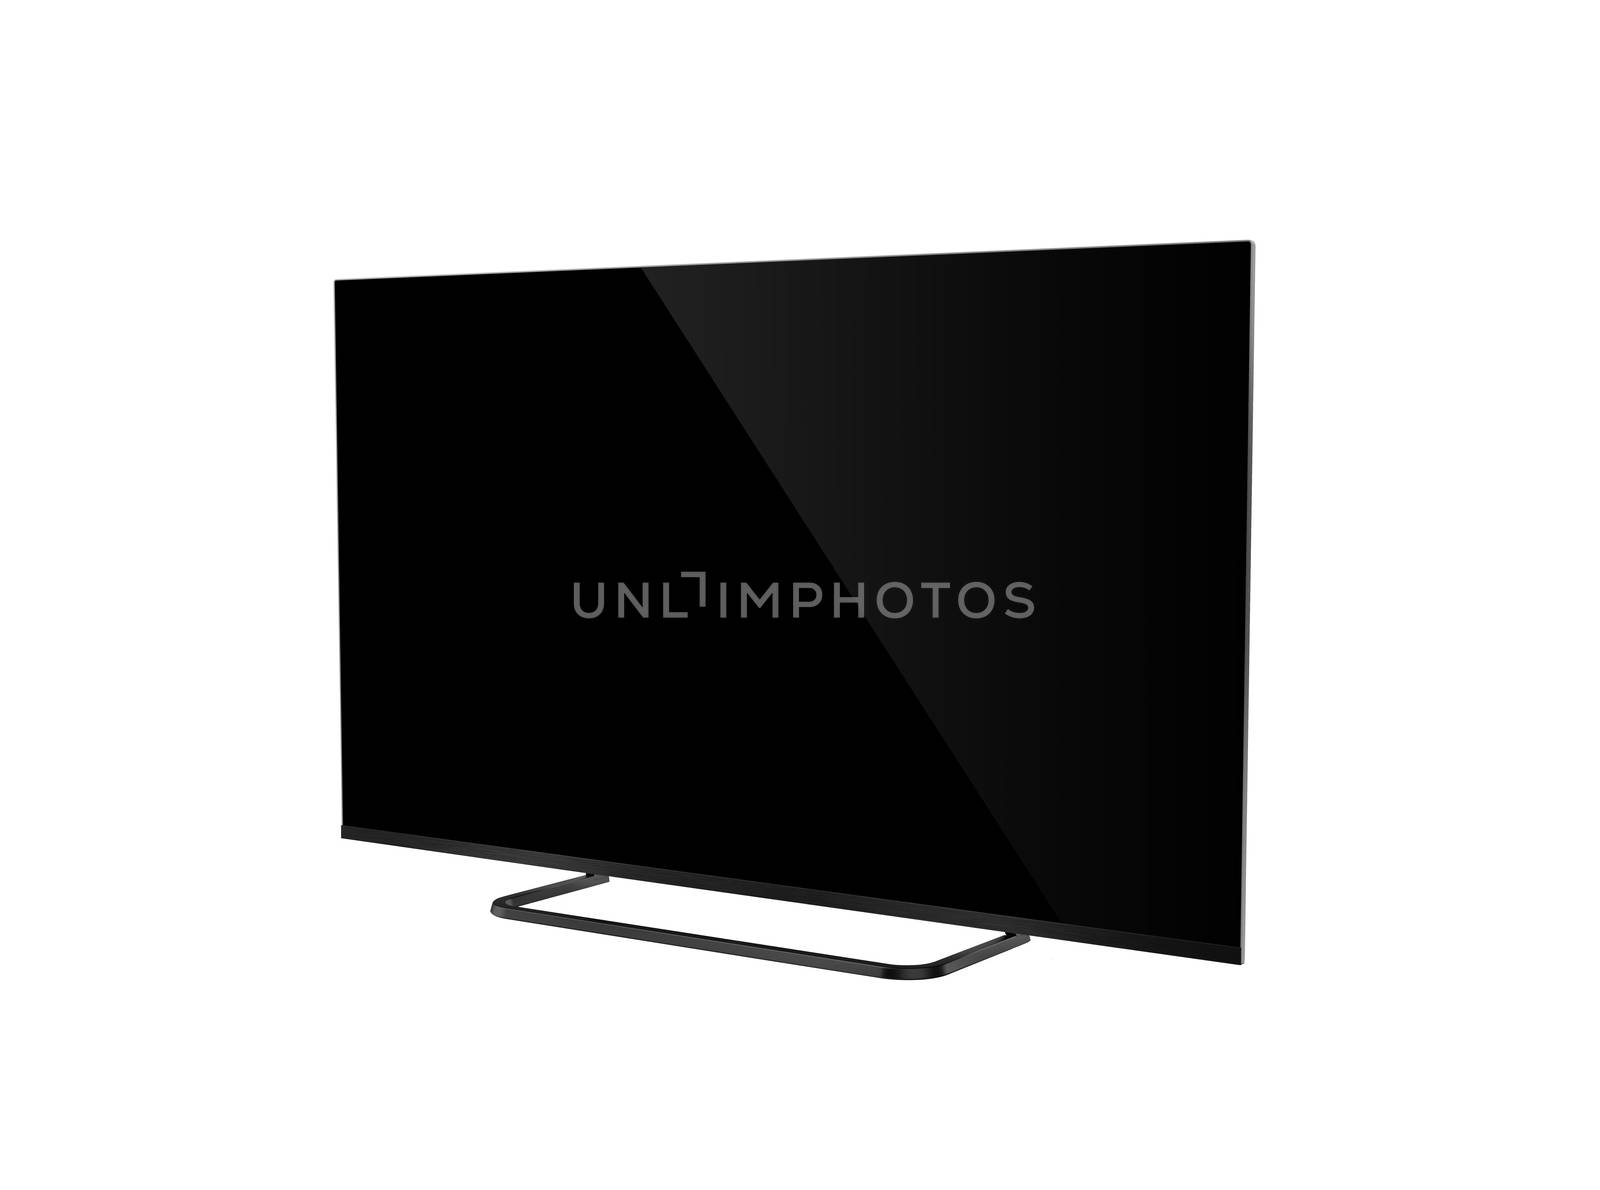 LCD TV with black screen isolated on white background